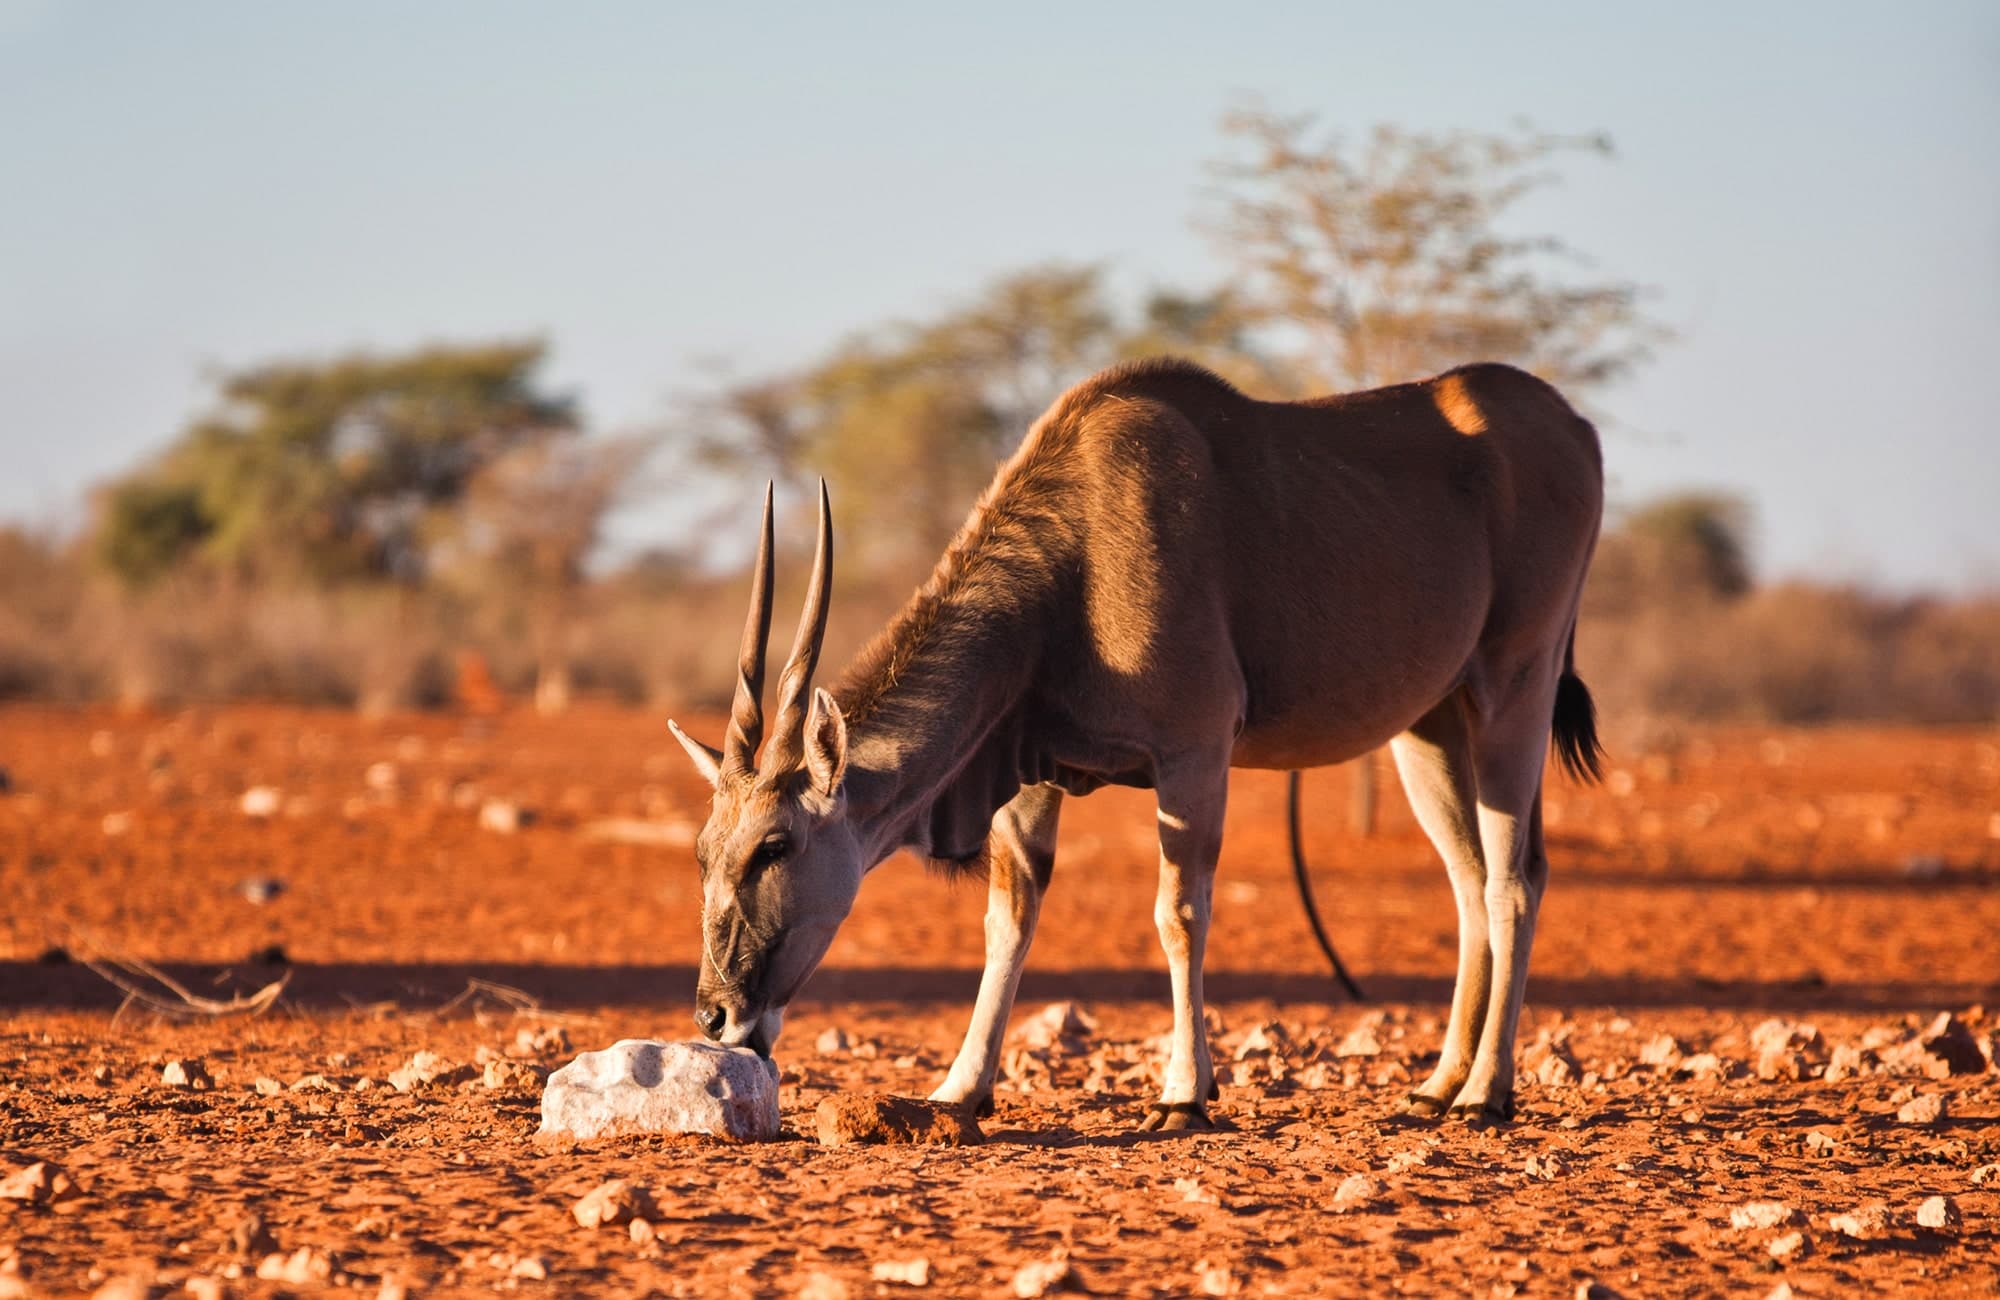 Discover the red sand dunes, view Oryx Antelope and taste Biltong!